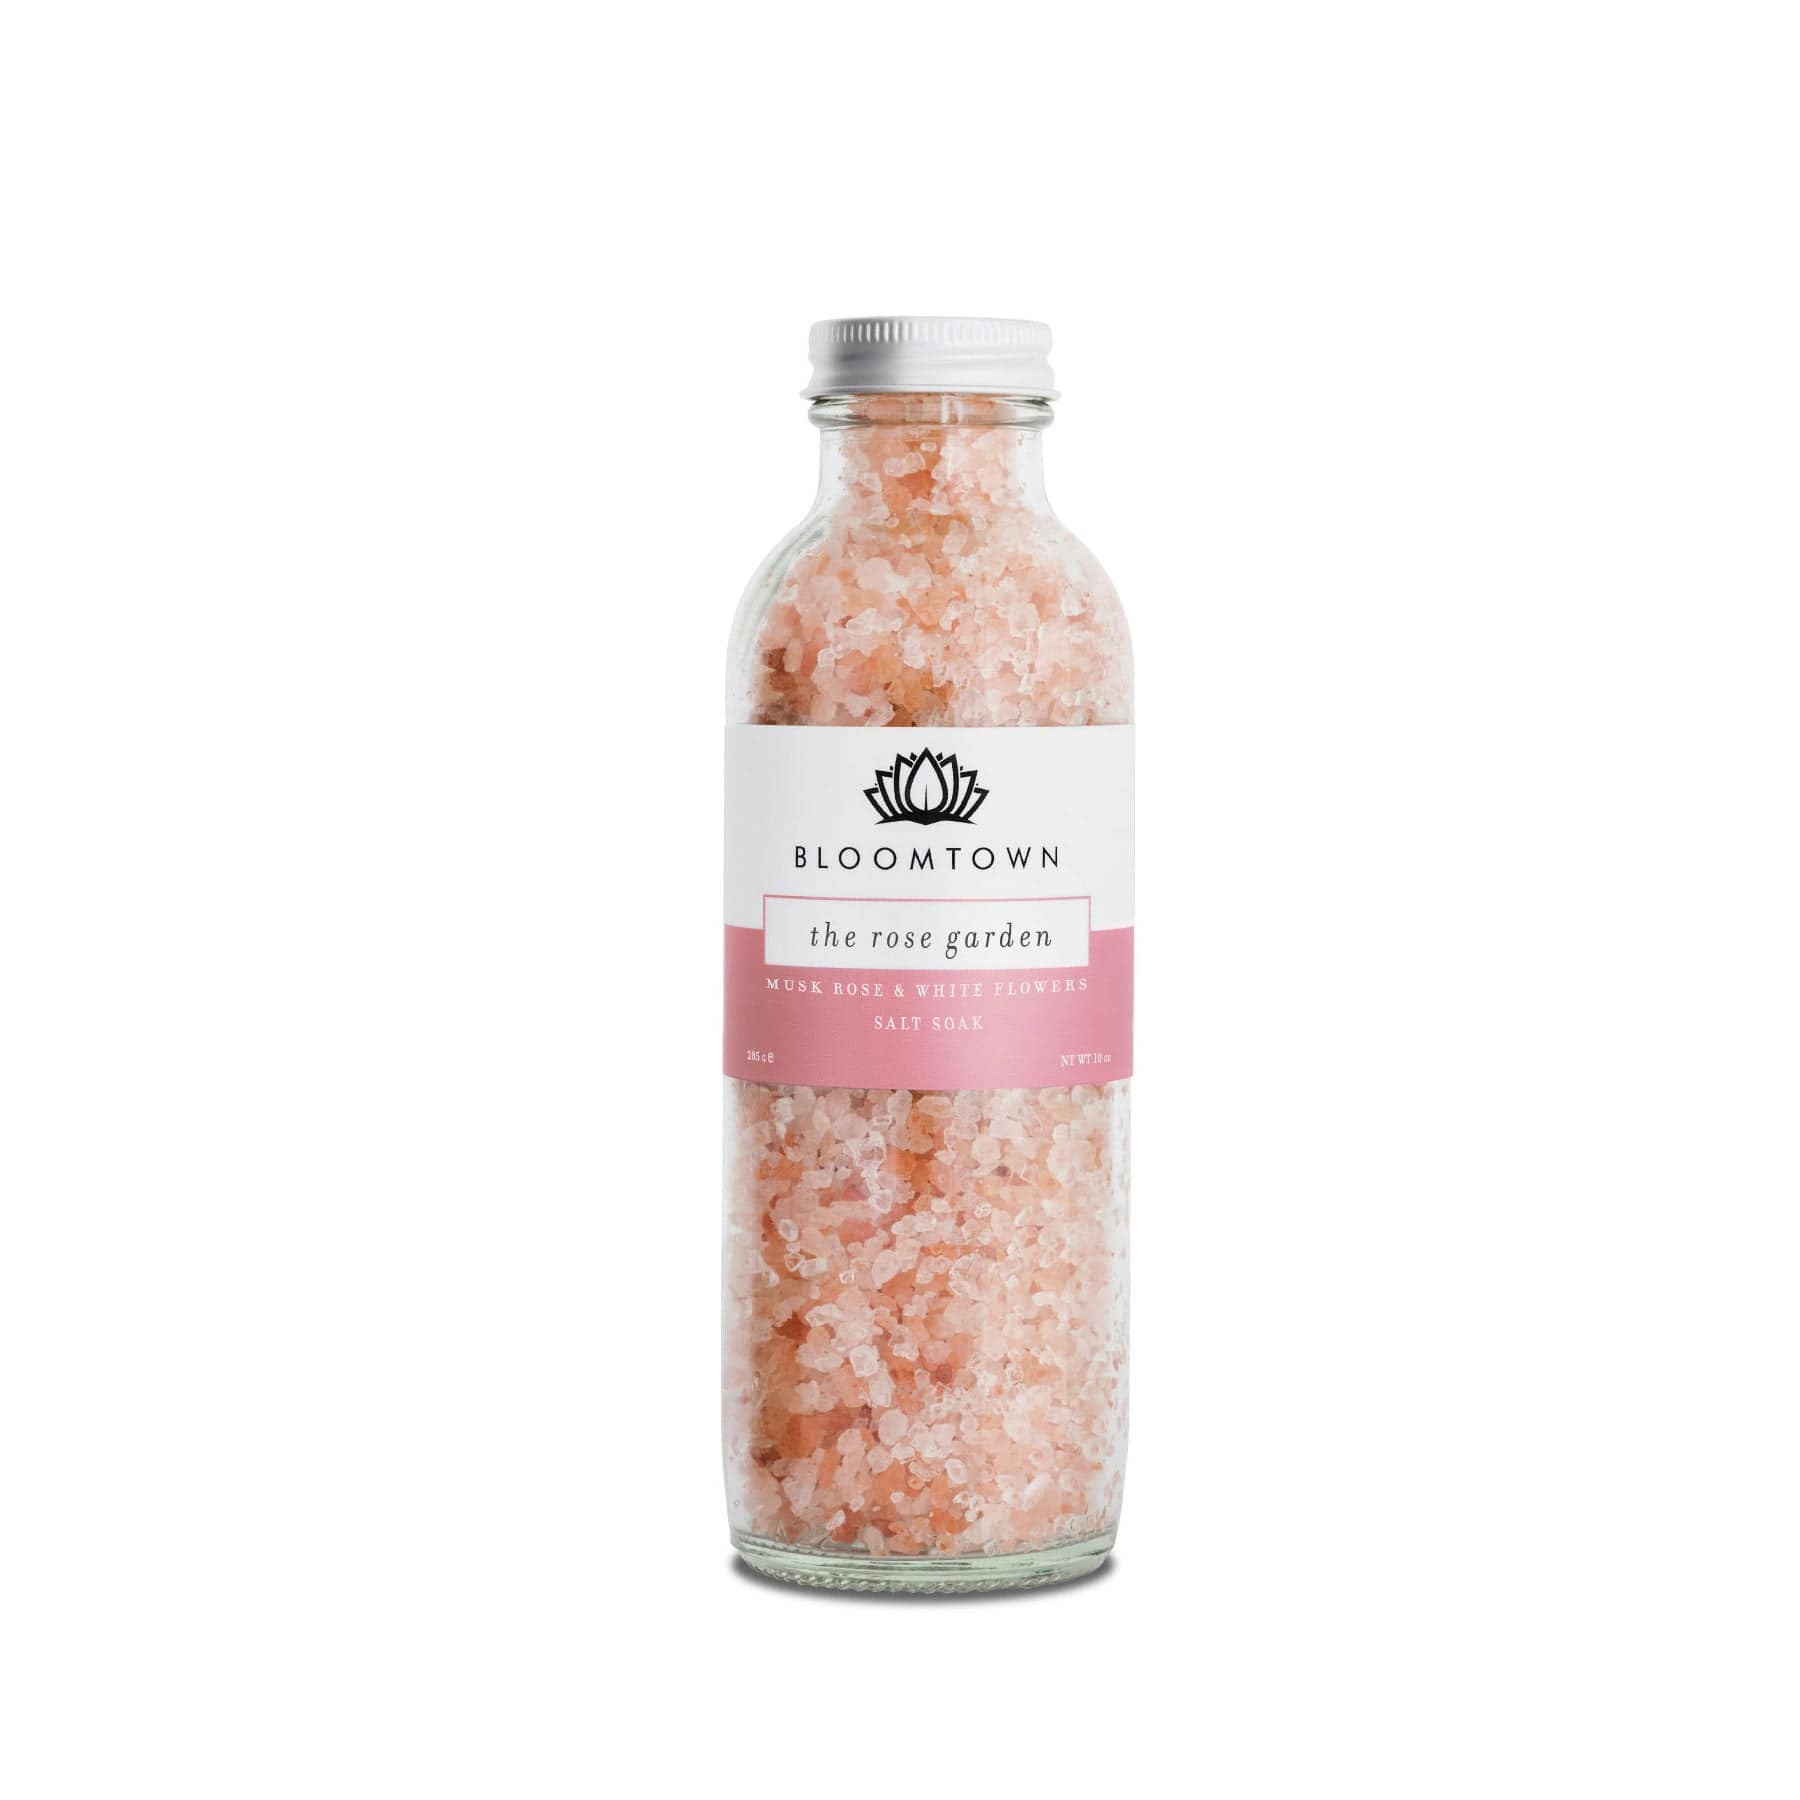 Bloomtown The Rose Garden salt soak bottle with musk rose and white flowers, pink bath salts in clear glass packaging on a white background.